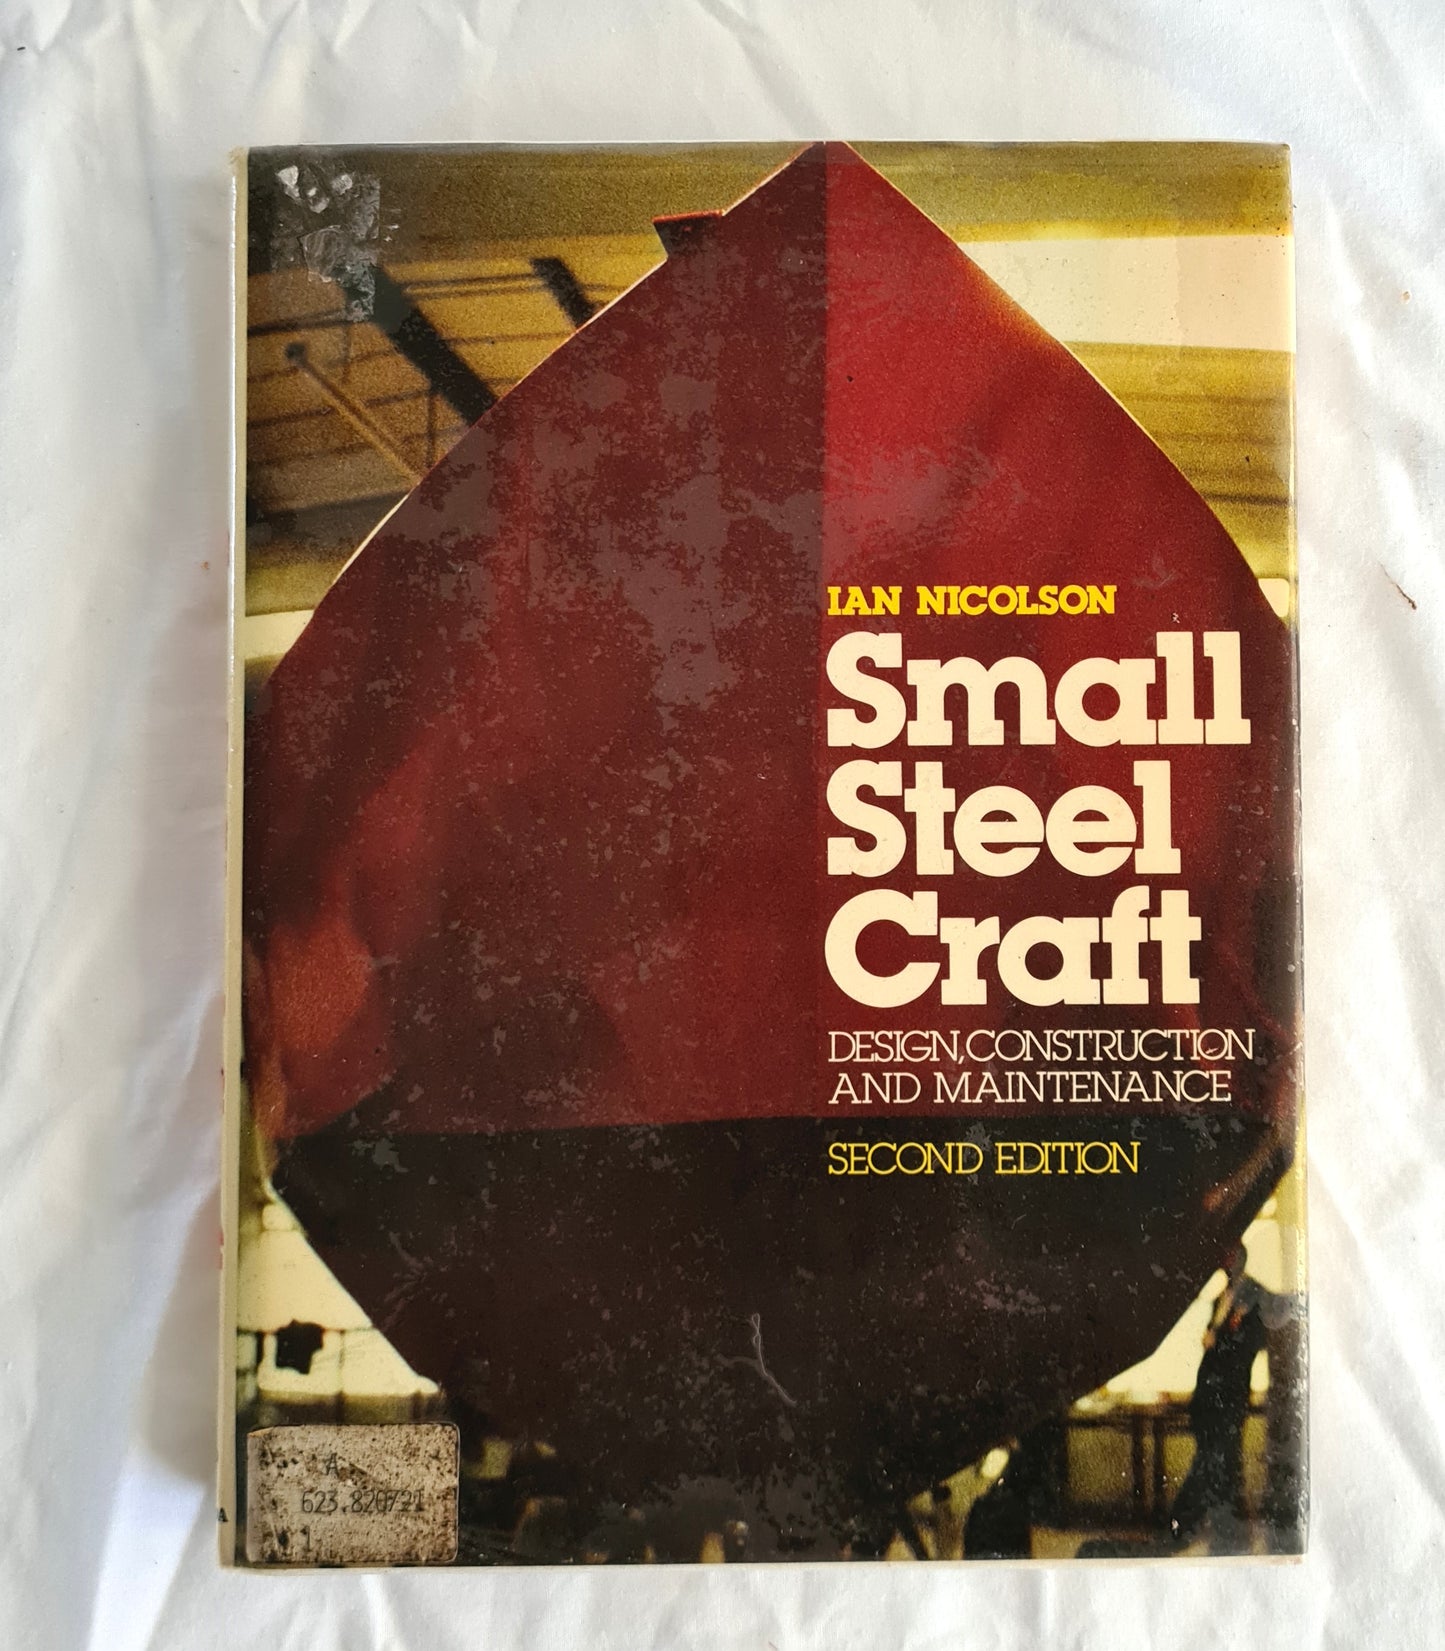 Small Steel Craft  Design, Construction and Maintenance  by Ian Nicolson